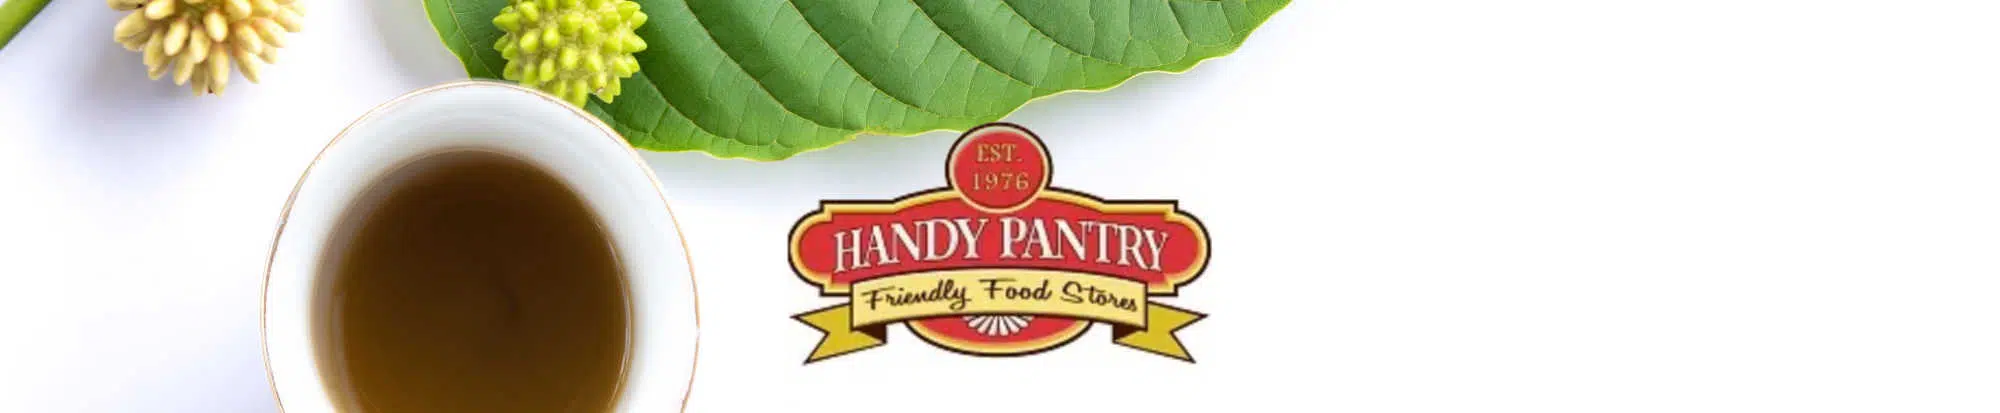 image of handy pantry